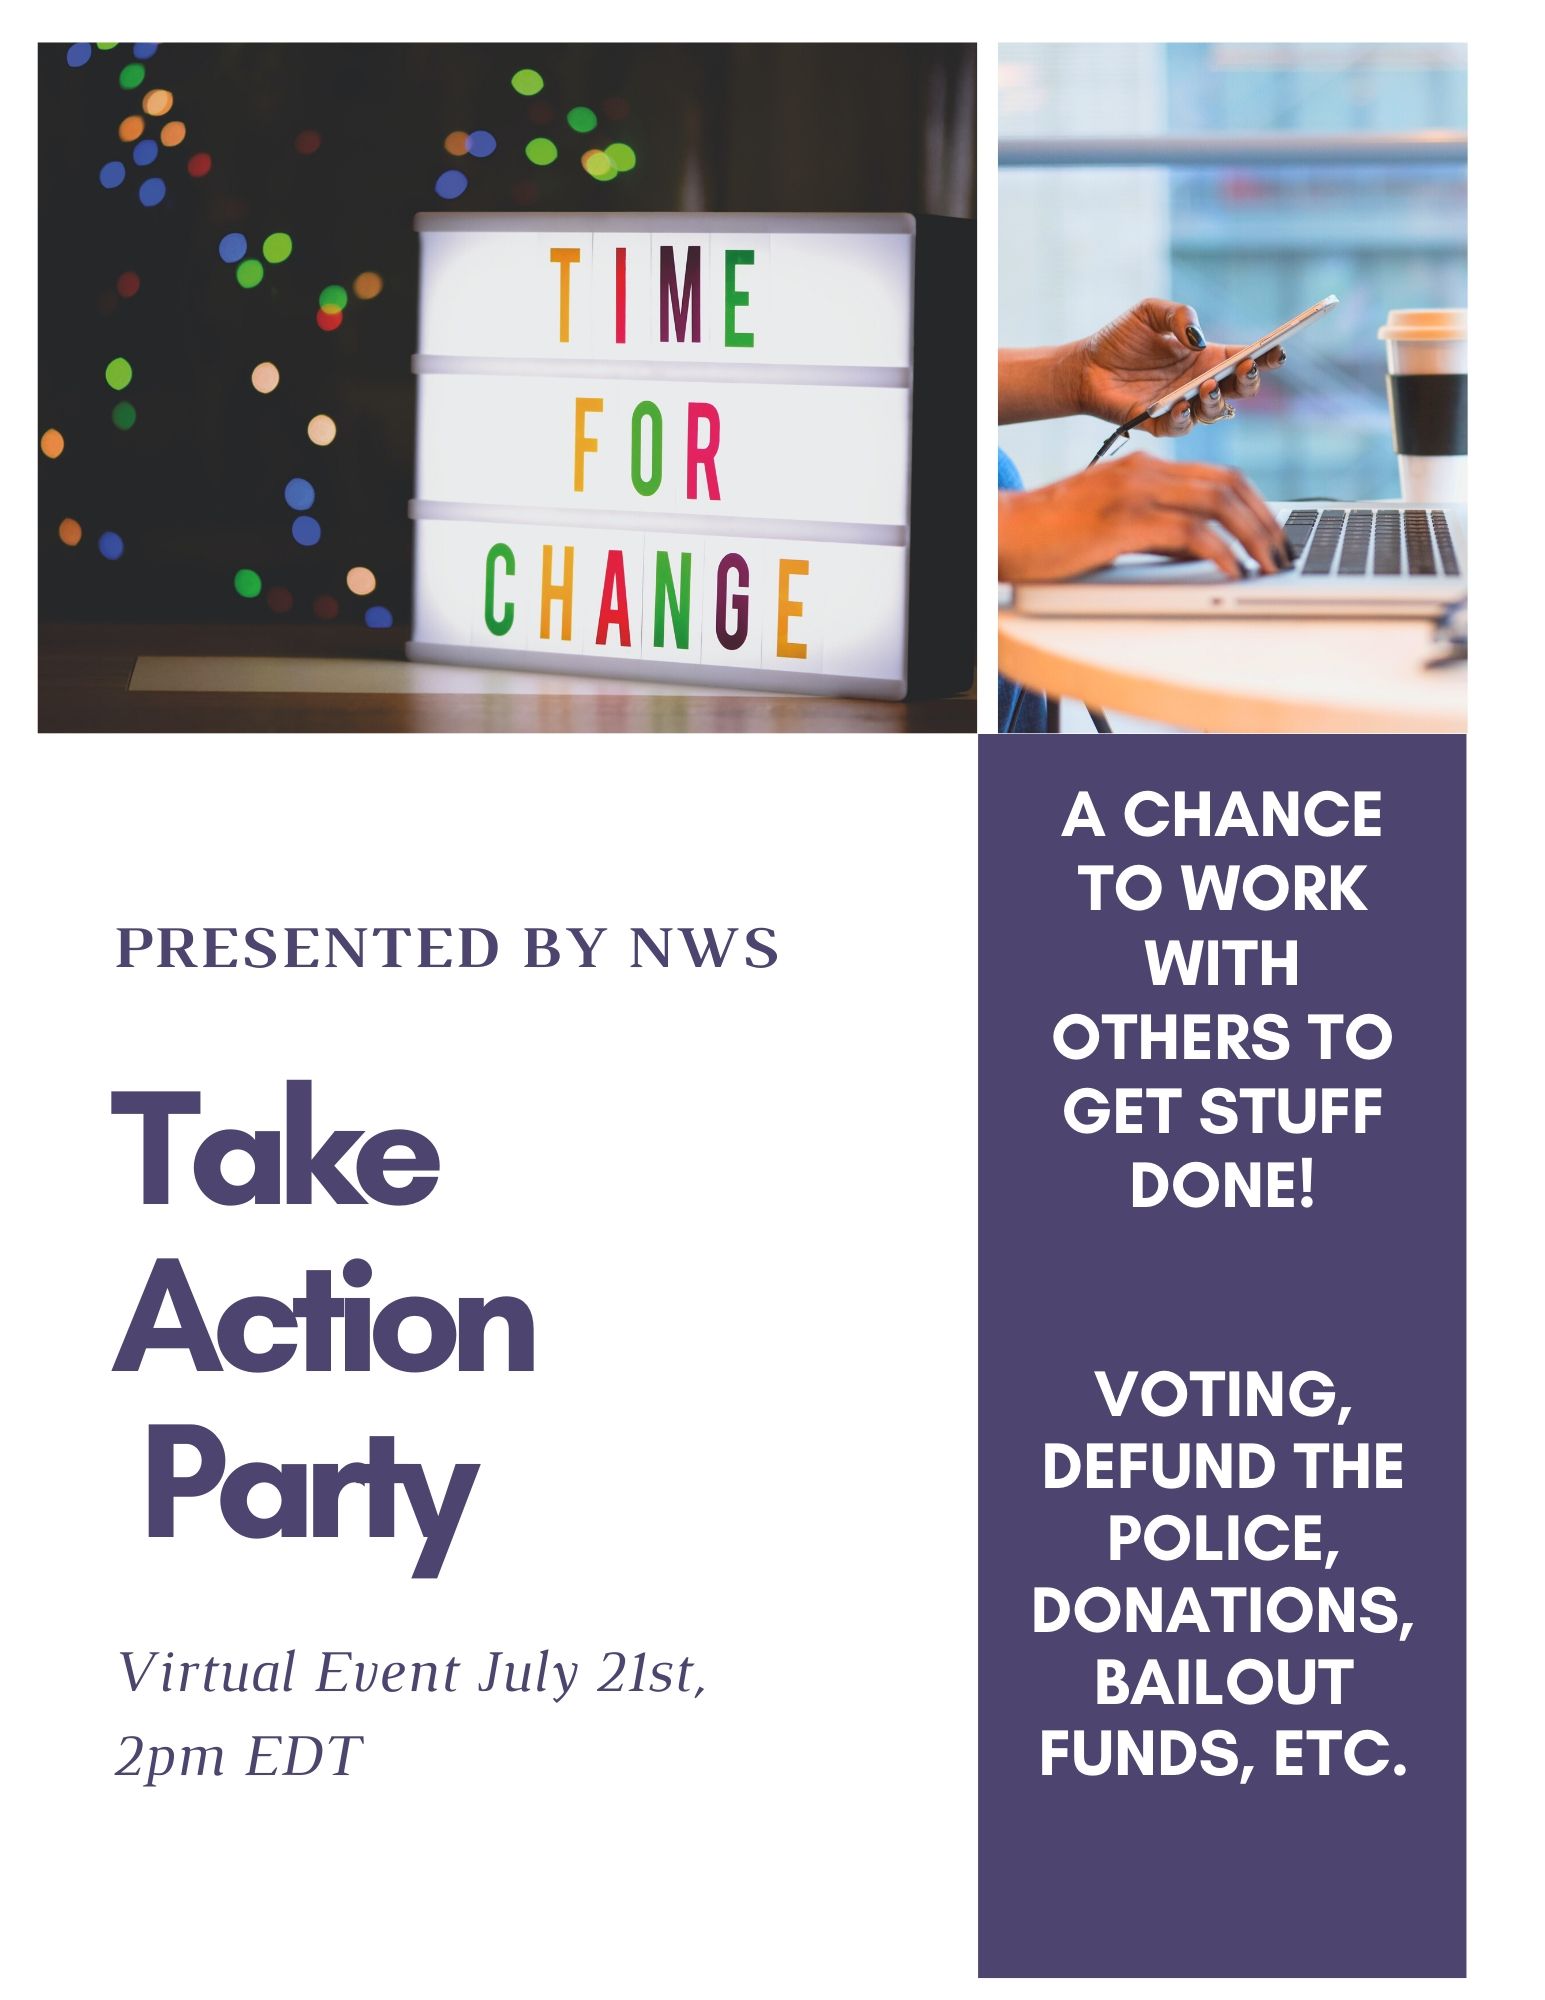 Take Action Party